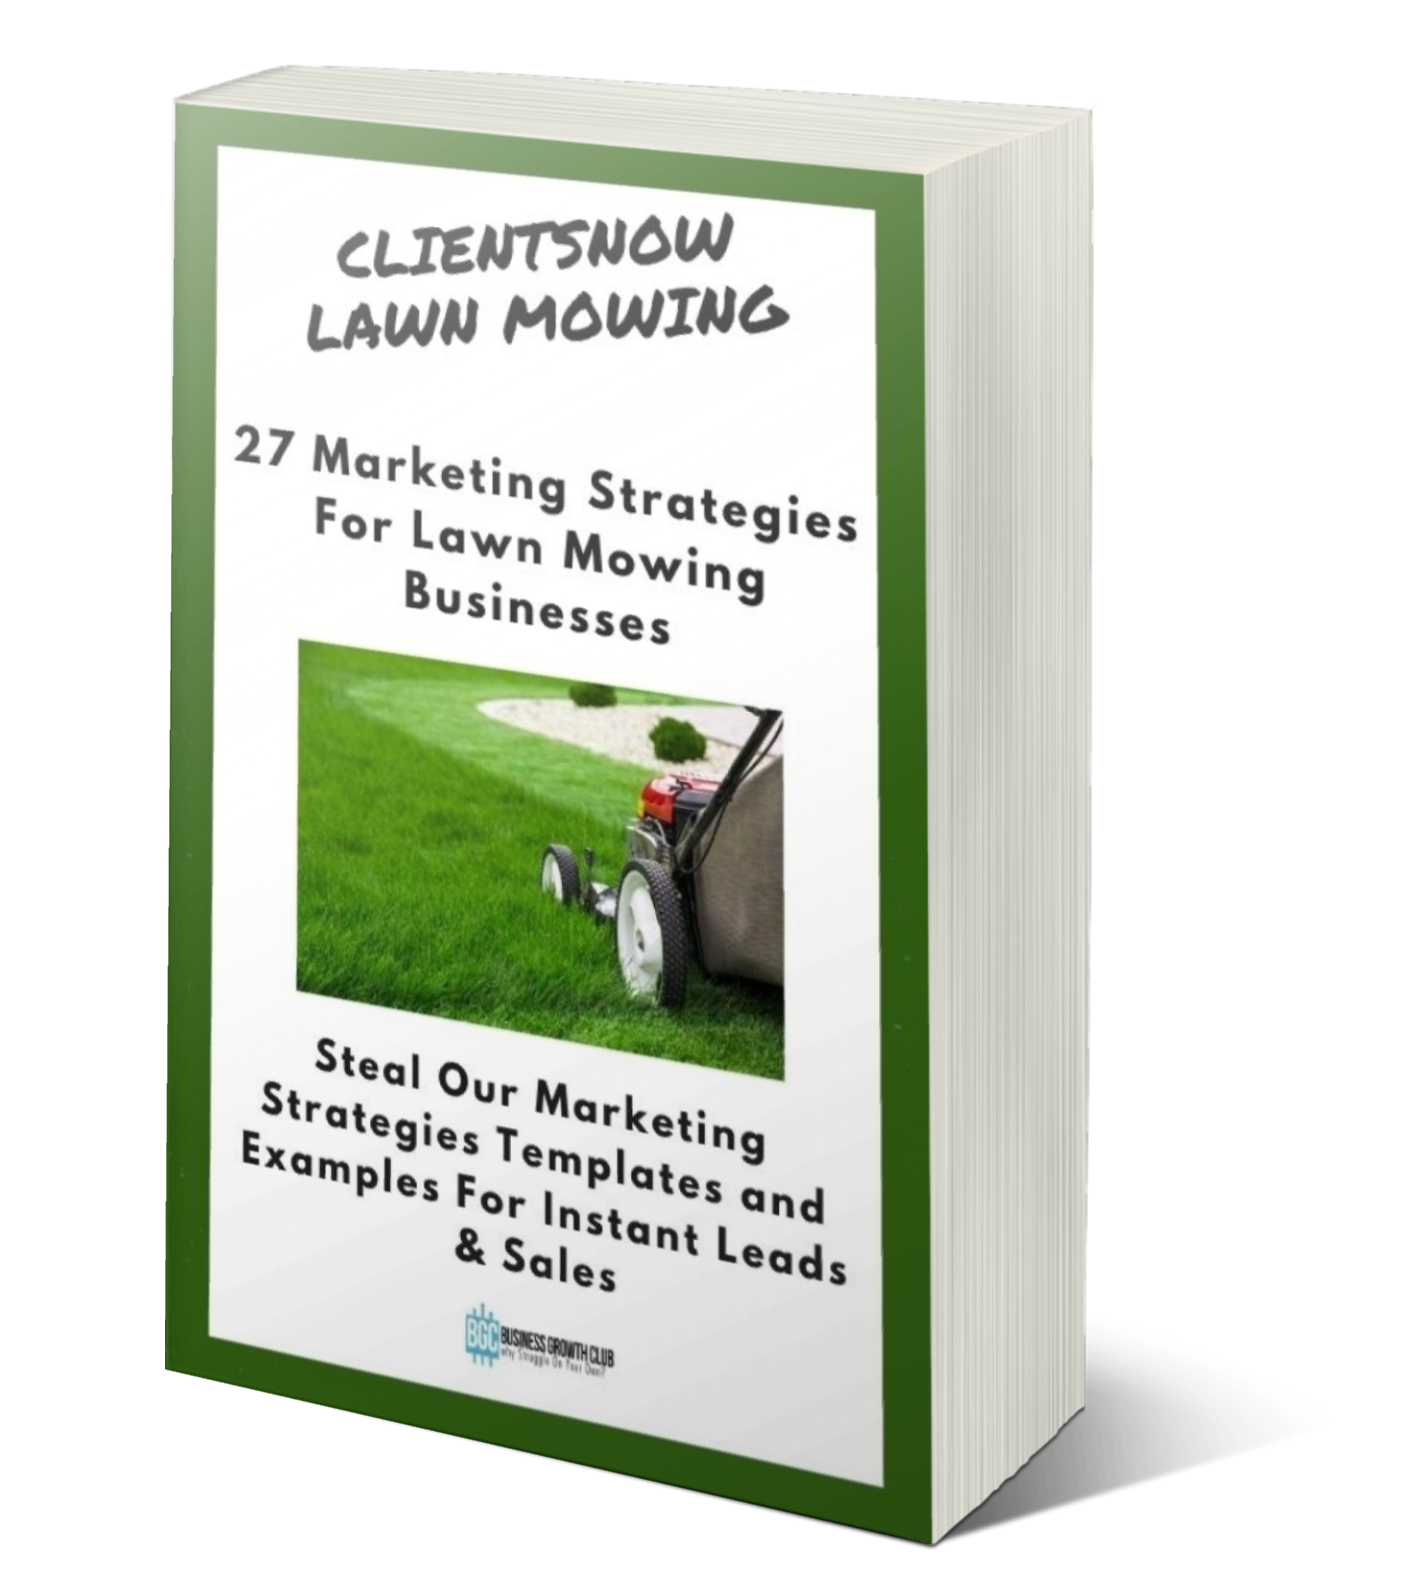 Mini ClientsNOW Lawn Mowing cover how to get clients lawn mowing garden care